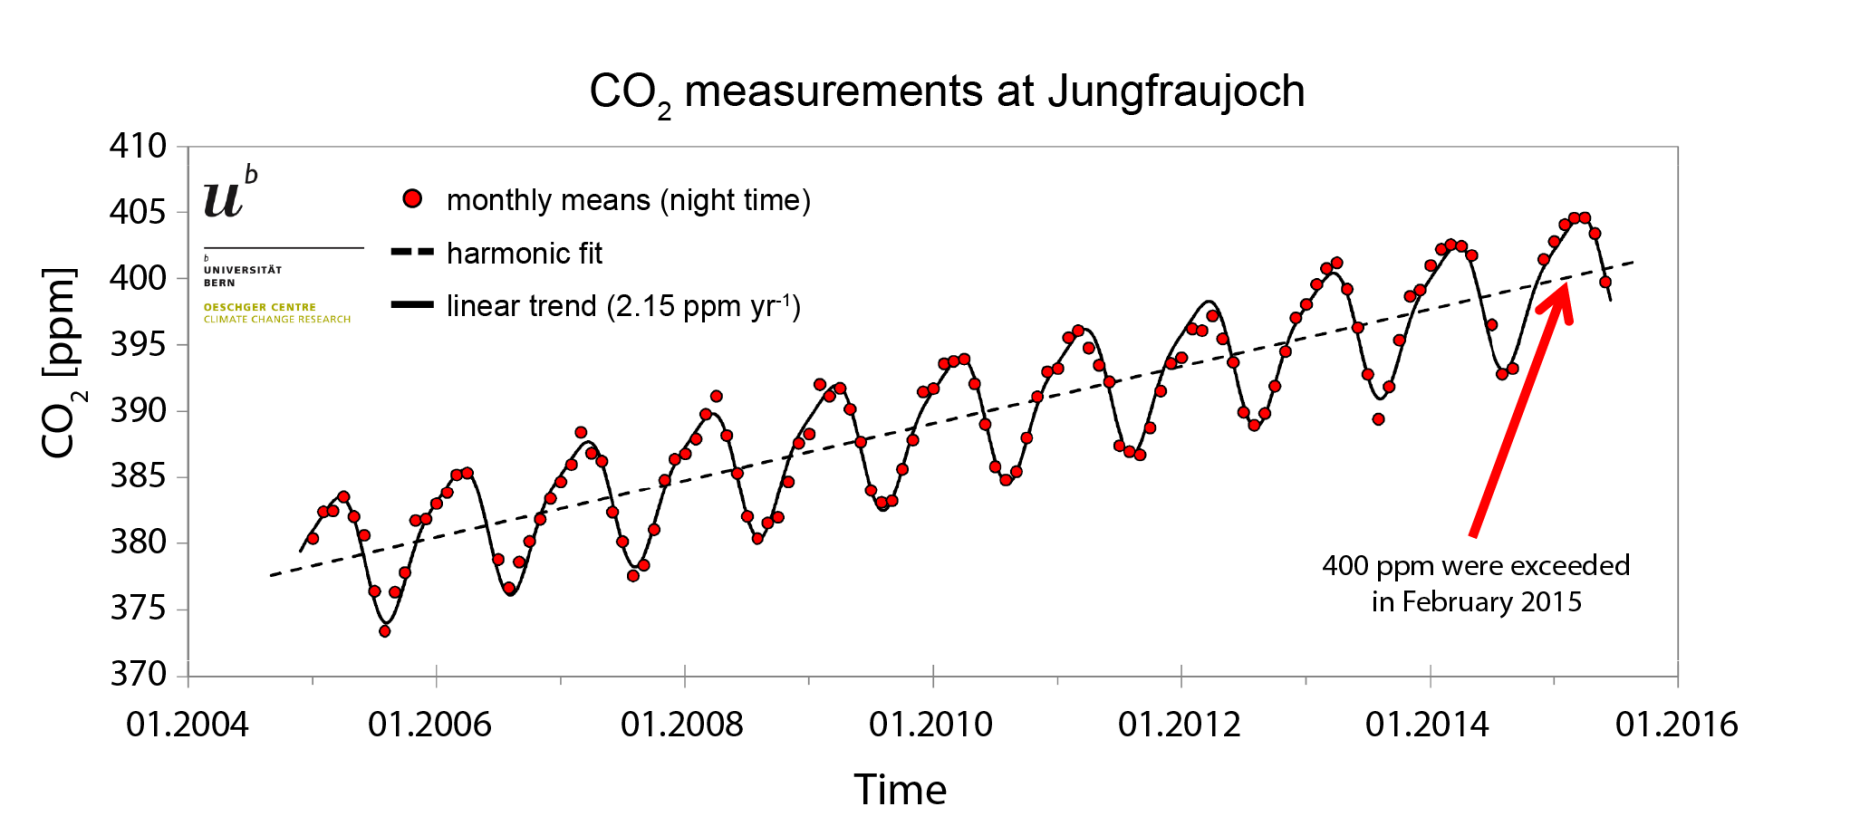 Enlarged view: Increasing CO2 concentration (in ppm) measured at Jungfraujoch